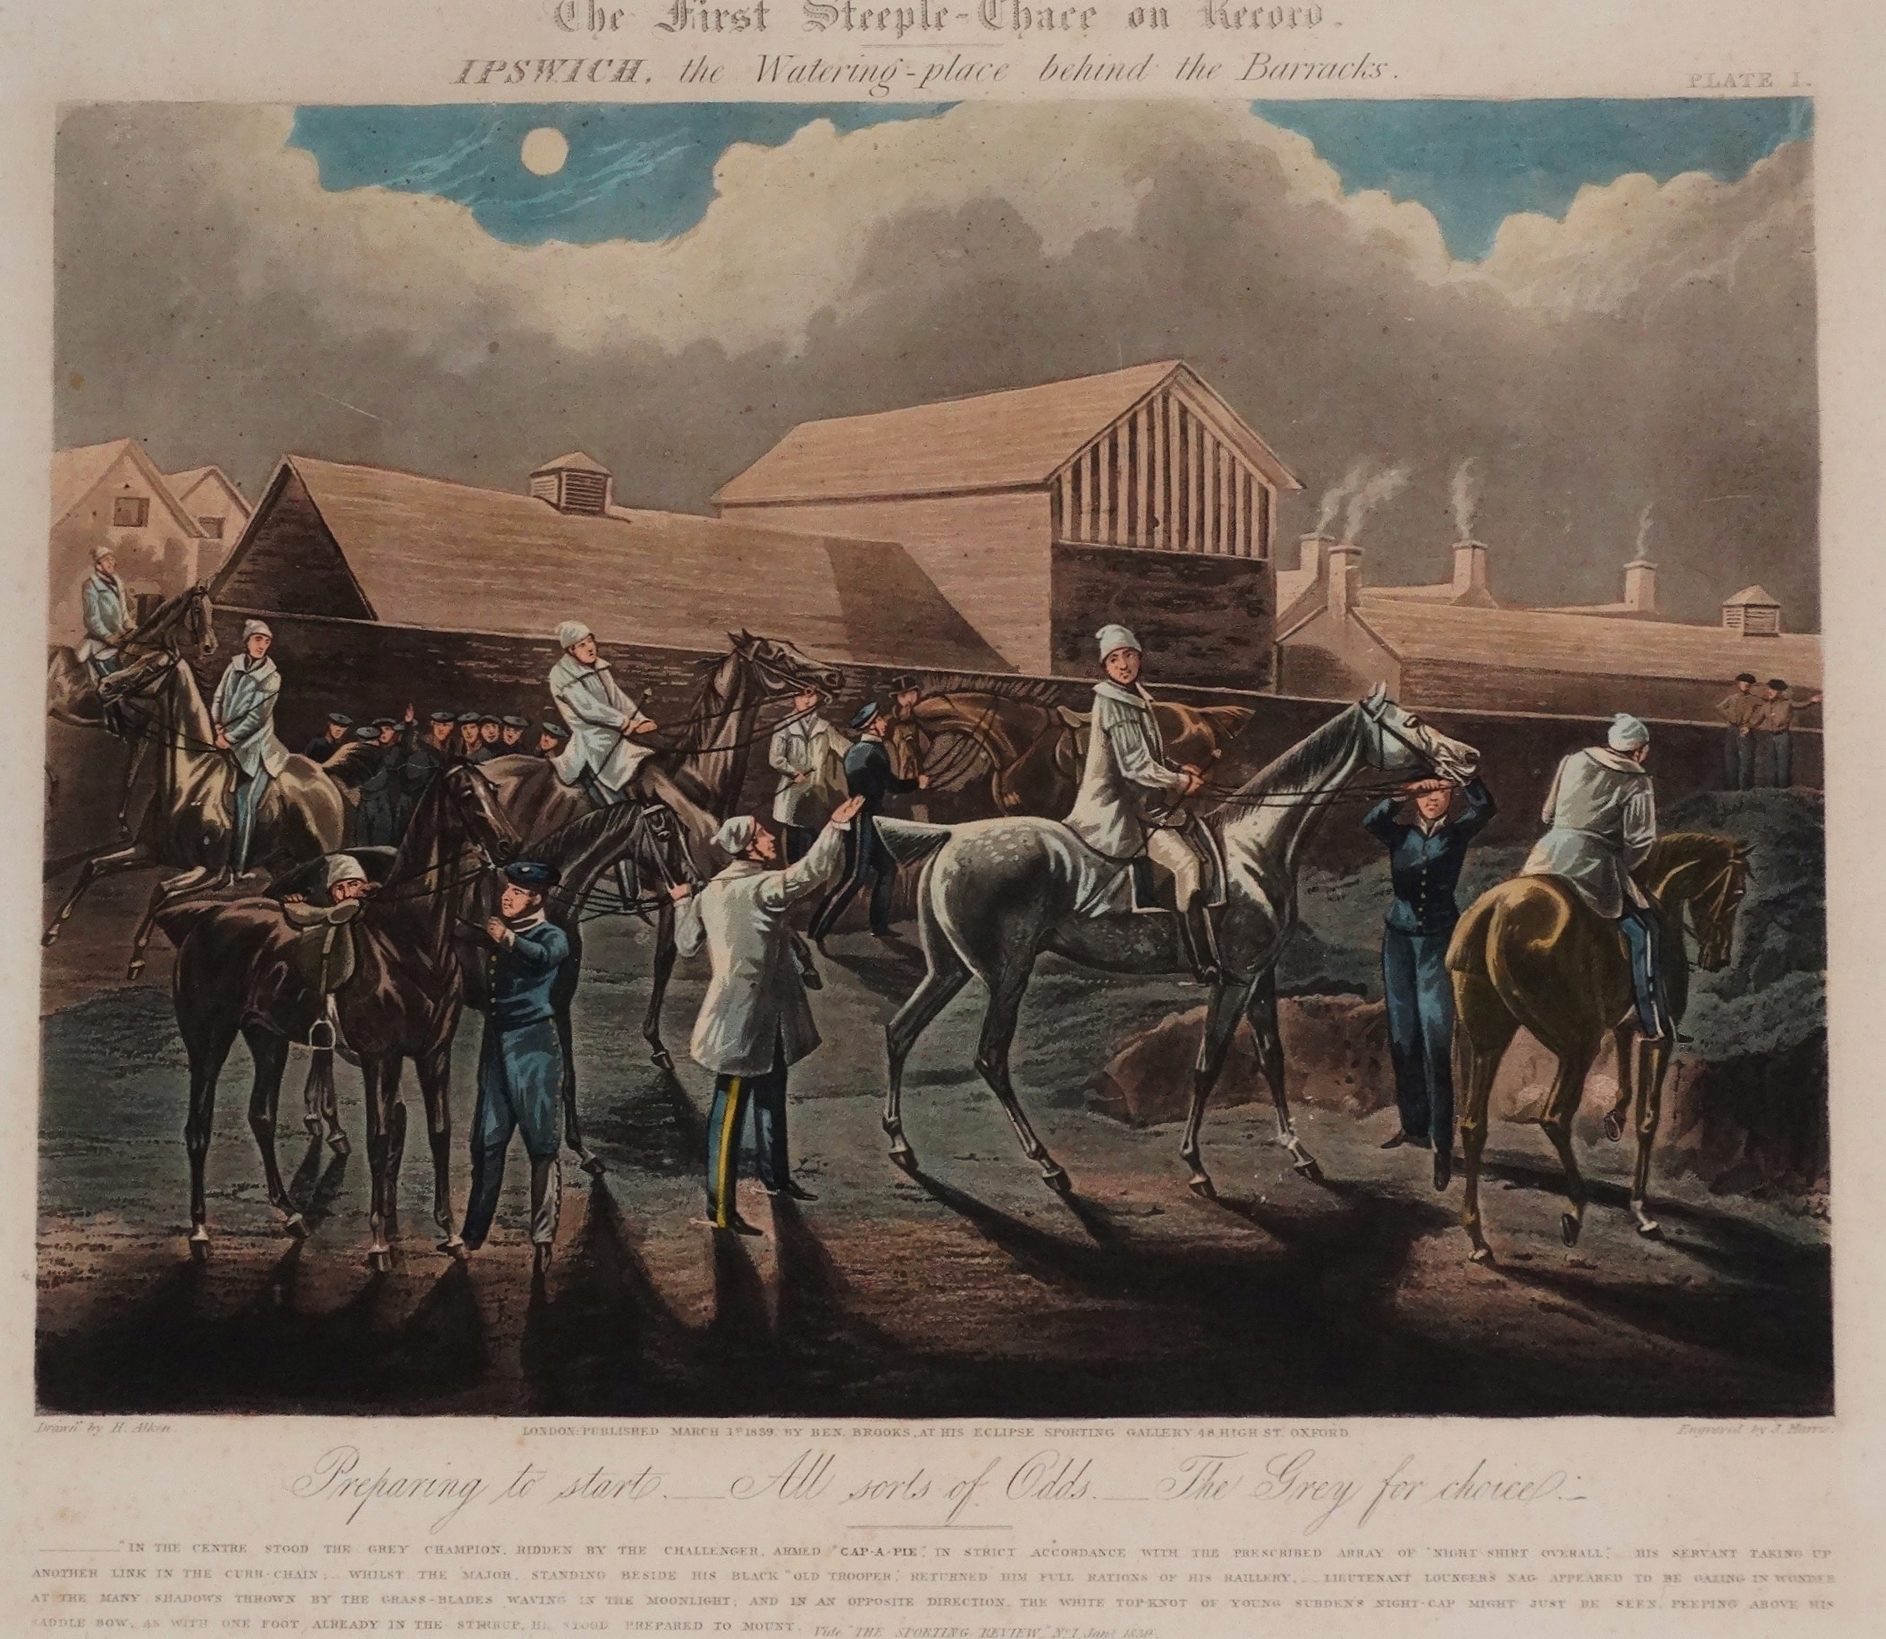 J. HARRIS after H. Alken A set of four hand coloured engravings The First Steeple-Chase on Record, - Image 4 of 5